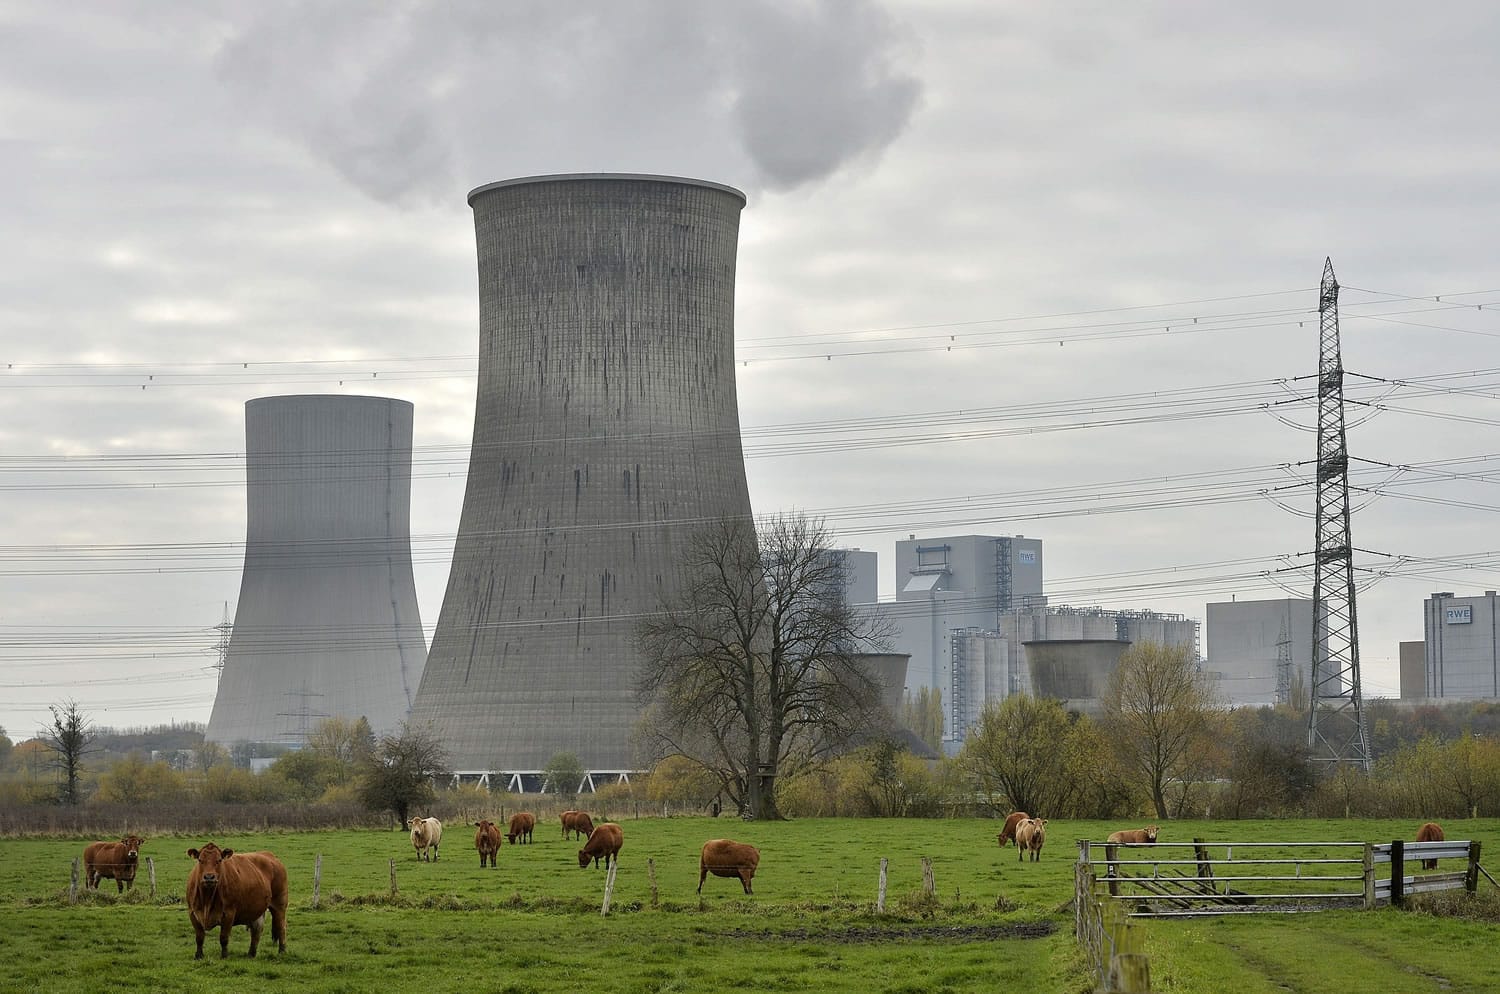 Cows stand in front of the latest coal-fired power station of German power provider RWE in Hamm, Germany.